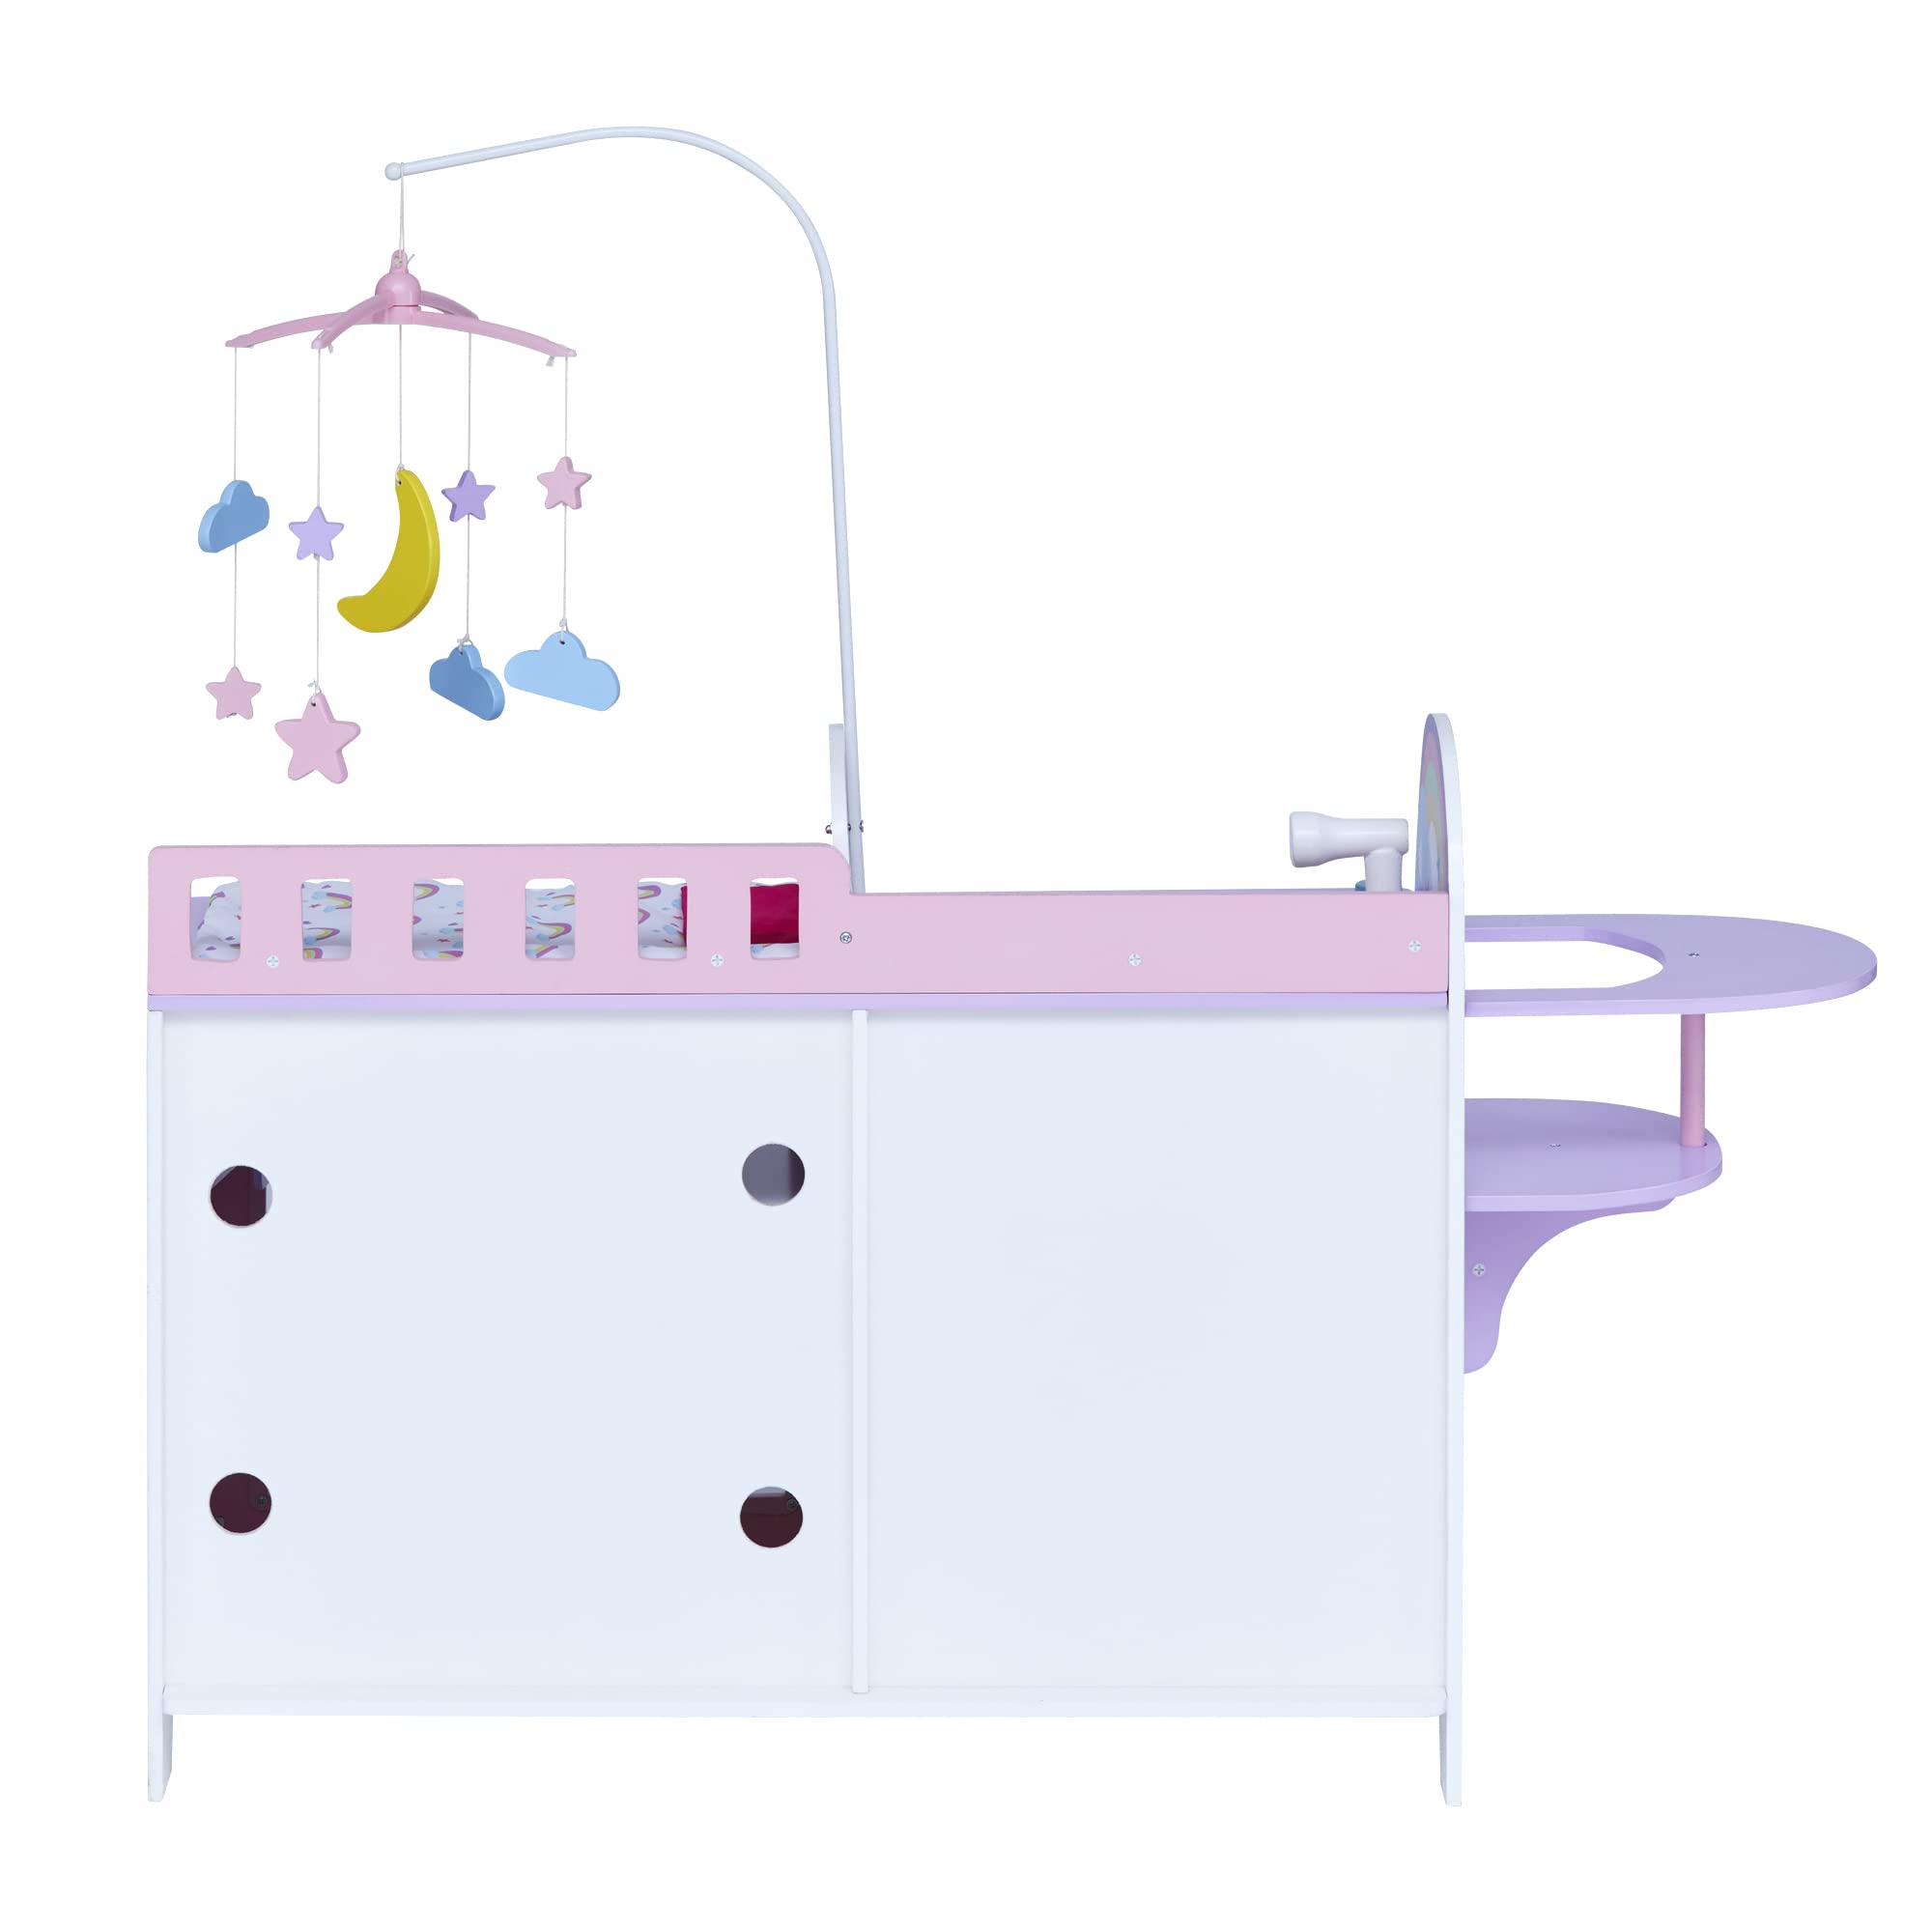 Olivia's Little World - Baby Doll Changing Table, Crib Furniture, Nursey Playset, Baby Care Activity Center with Storage for Dolls Accessories - Pink/Purple